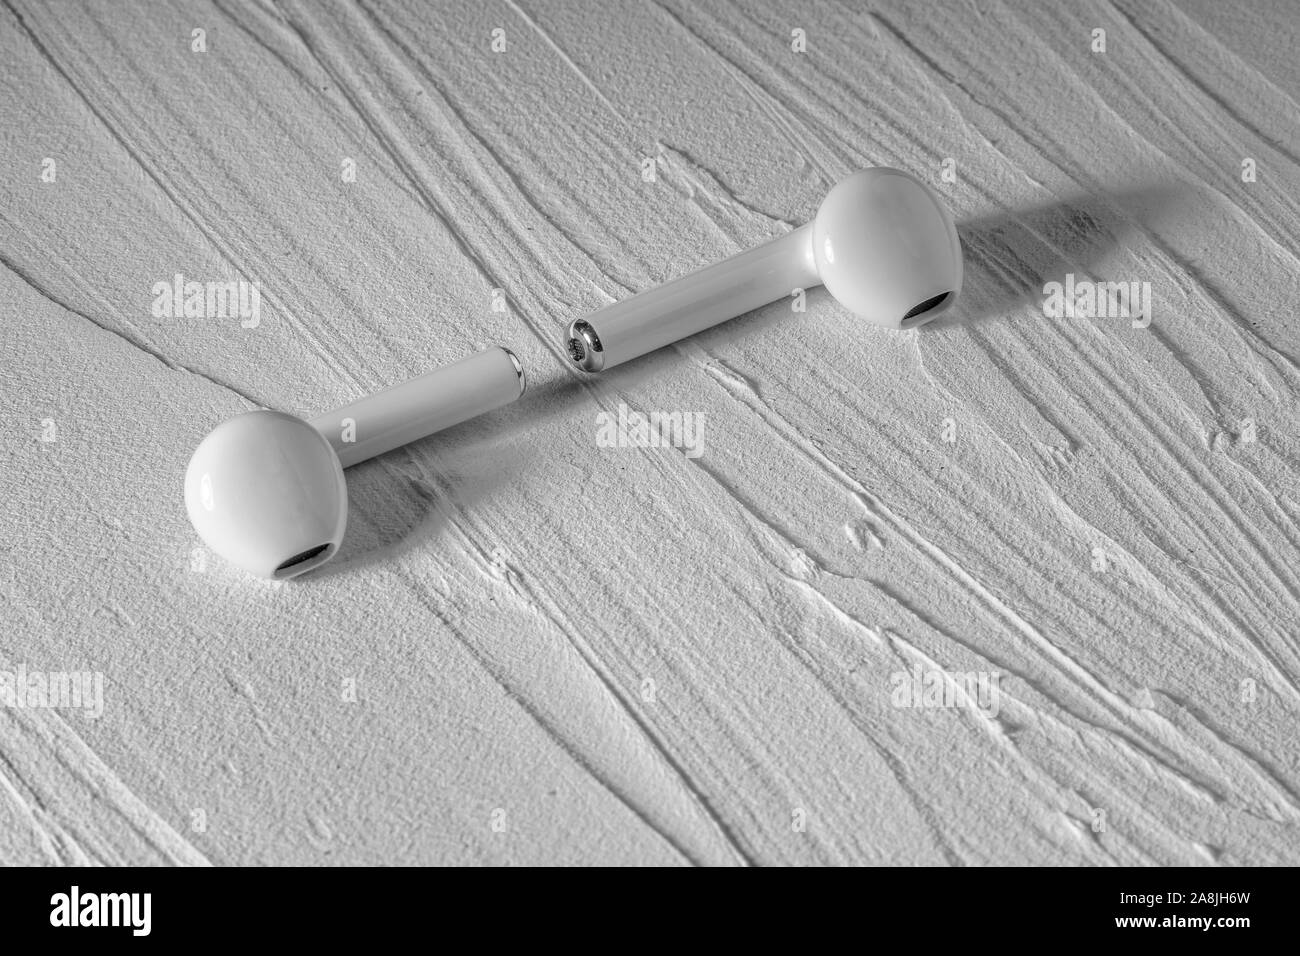 isolated earphones on a texture background Stock Photo